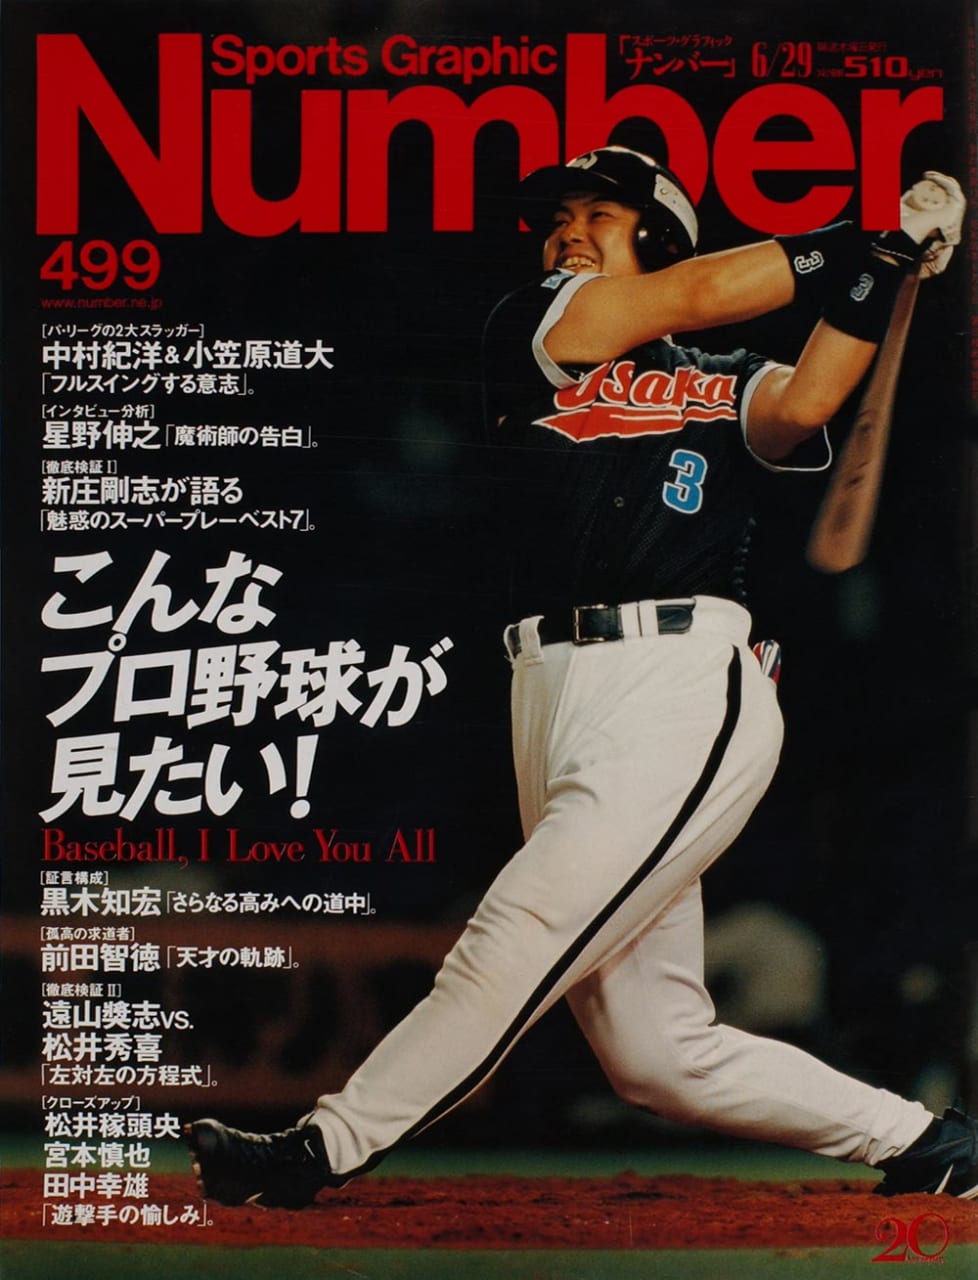 Sports Graphic Number 499号
2000年6月15日発売
表紙撮影：杉山ヒデキ